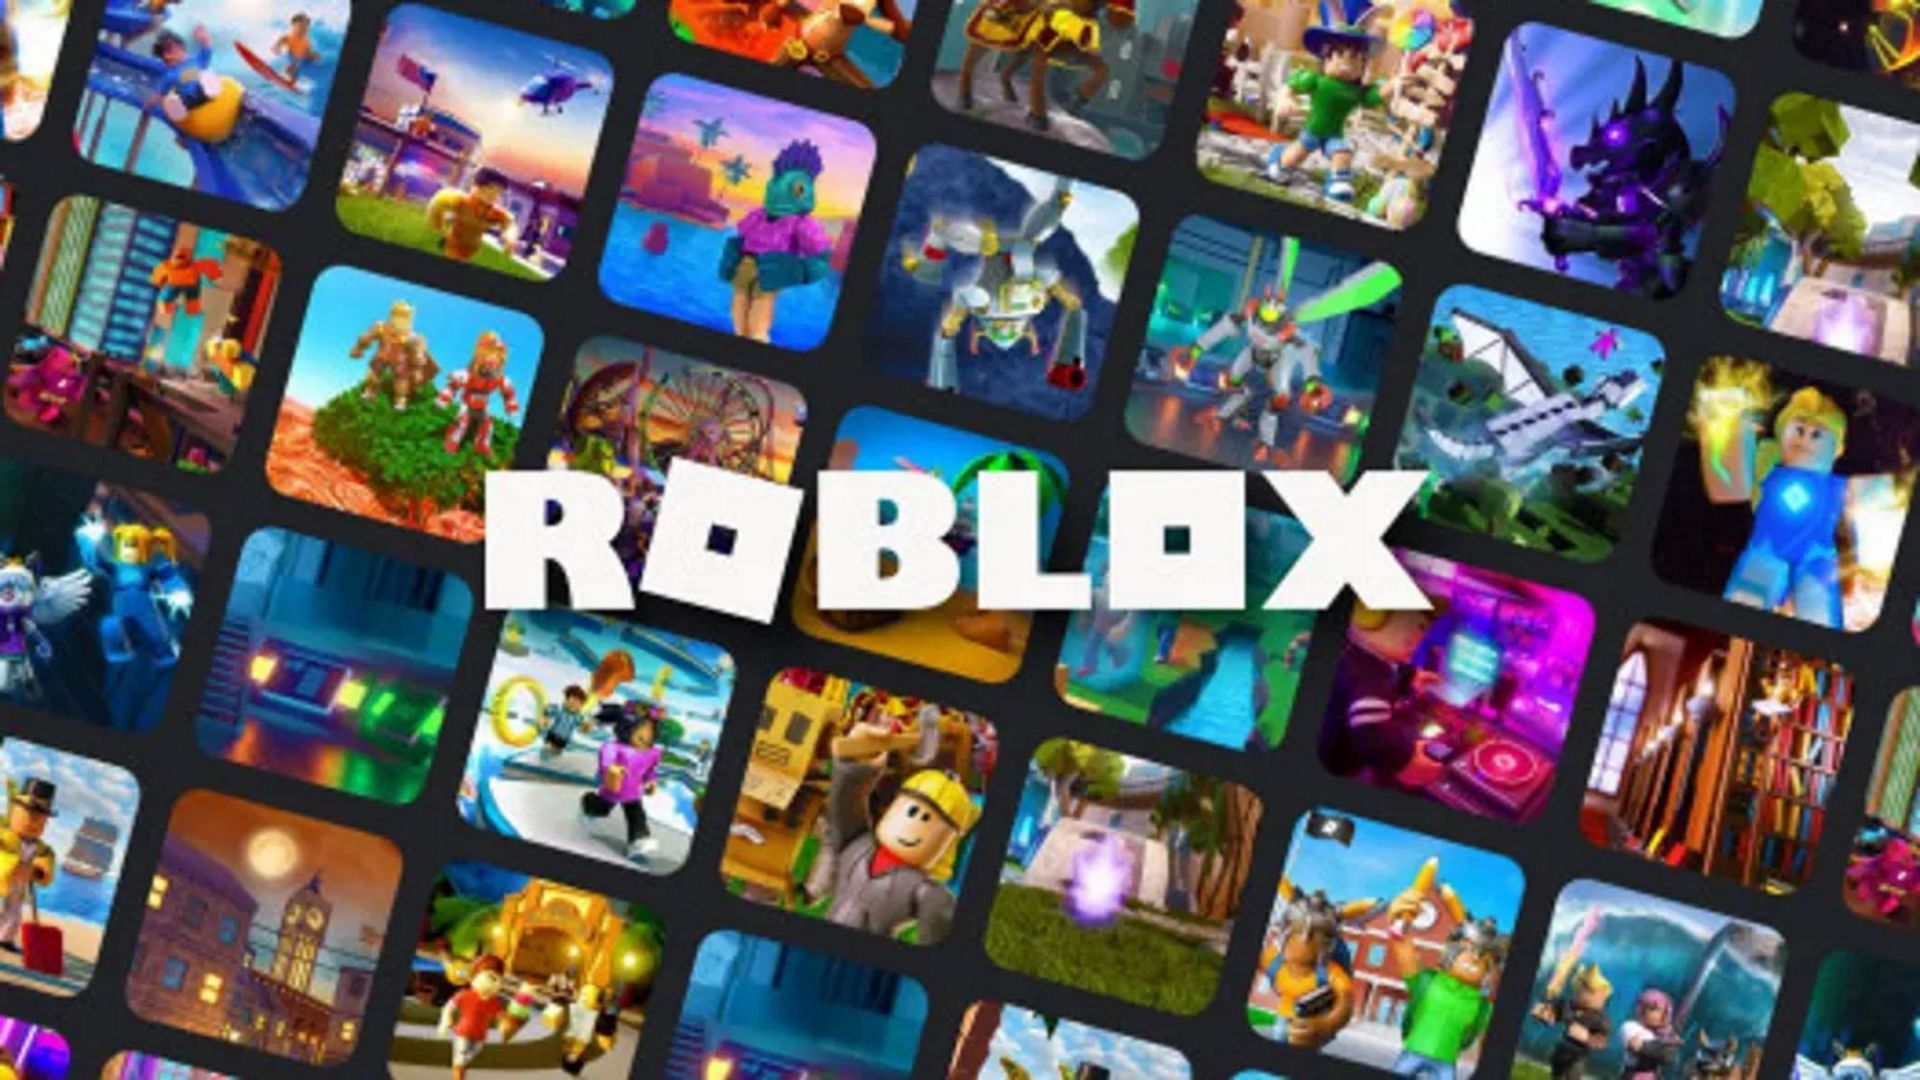 Roblox Aincrad Adventures codes for free spins and resets (Image via Roblox)